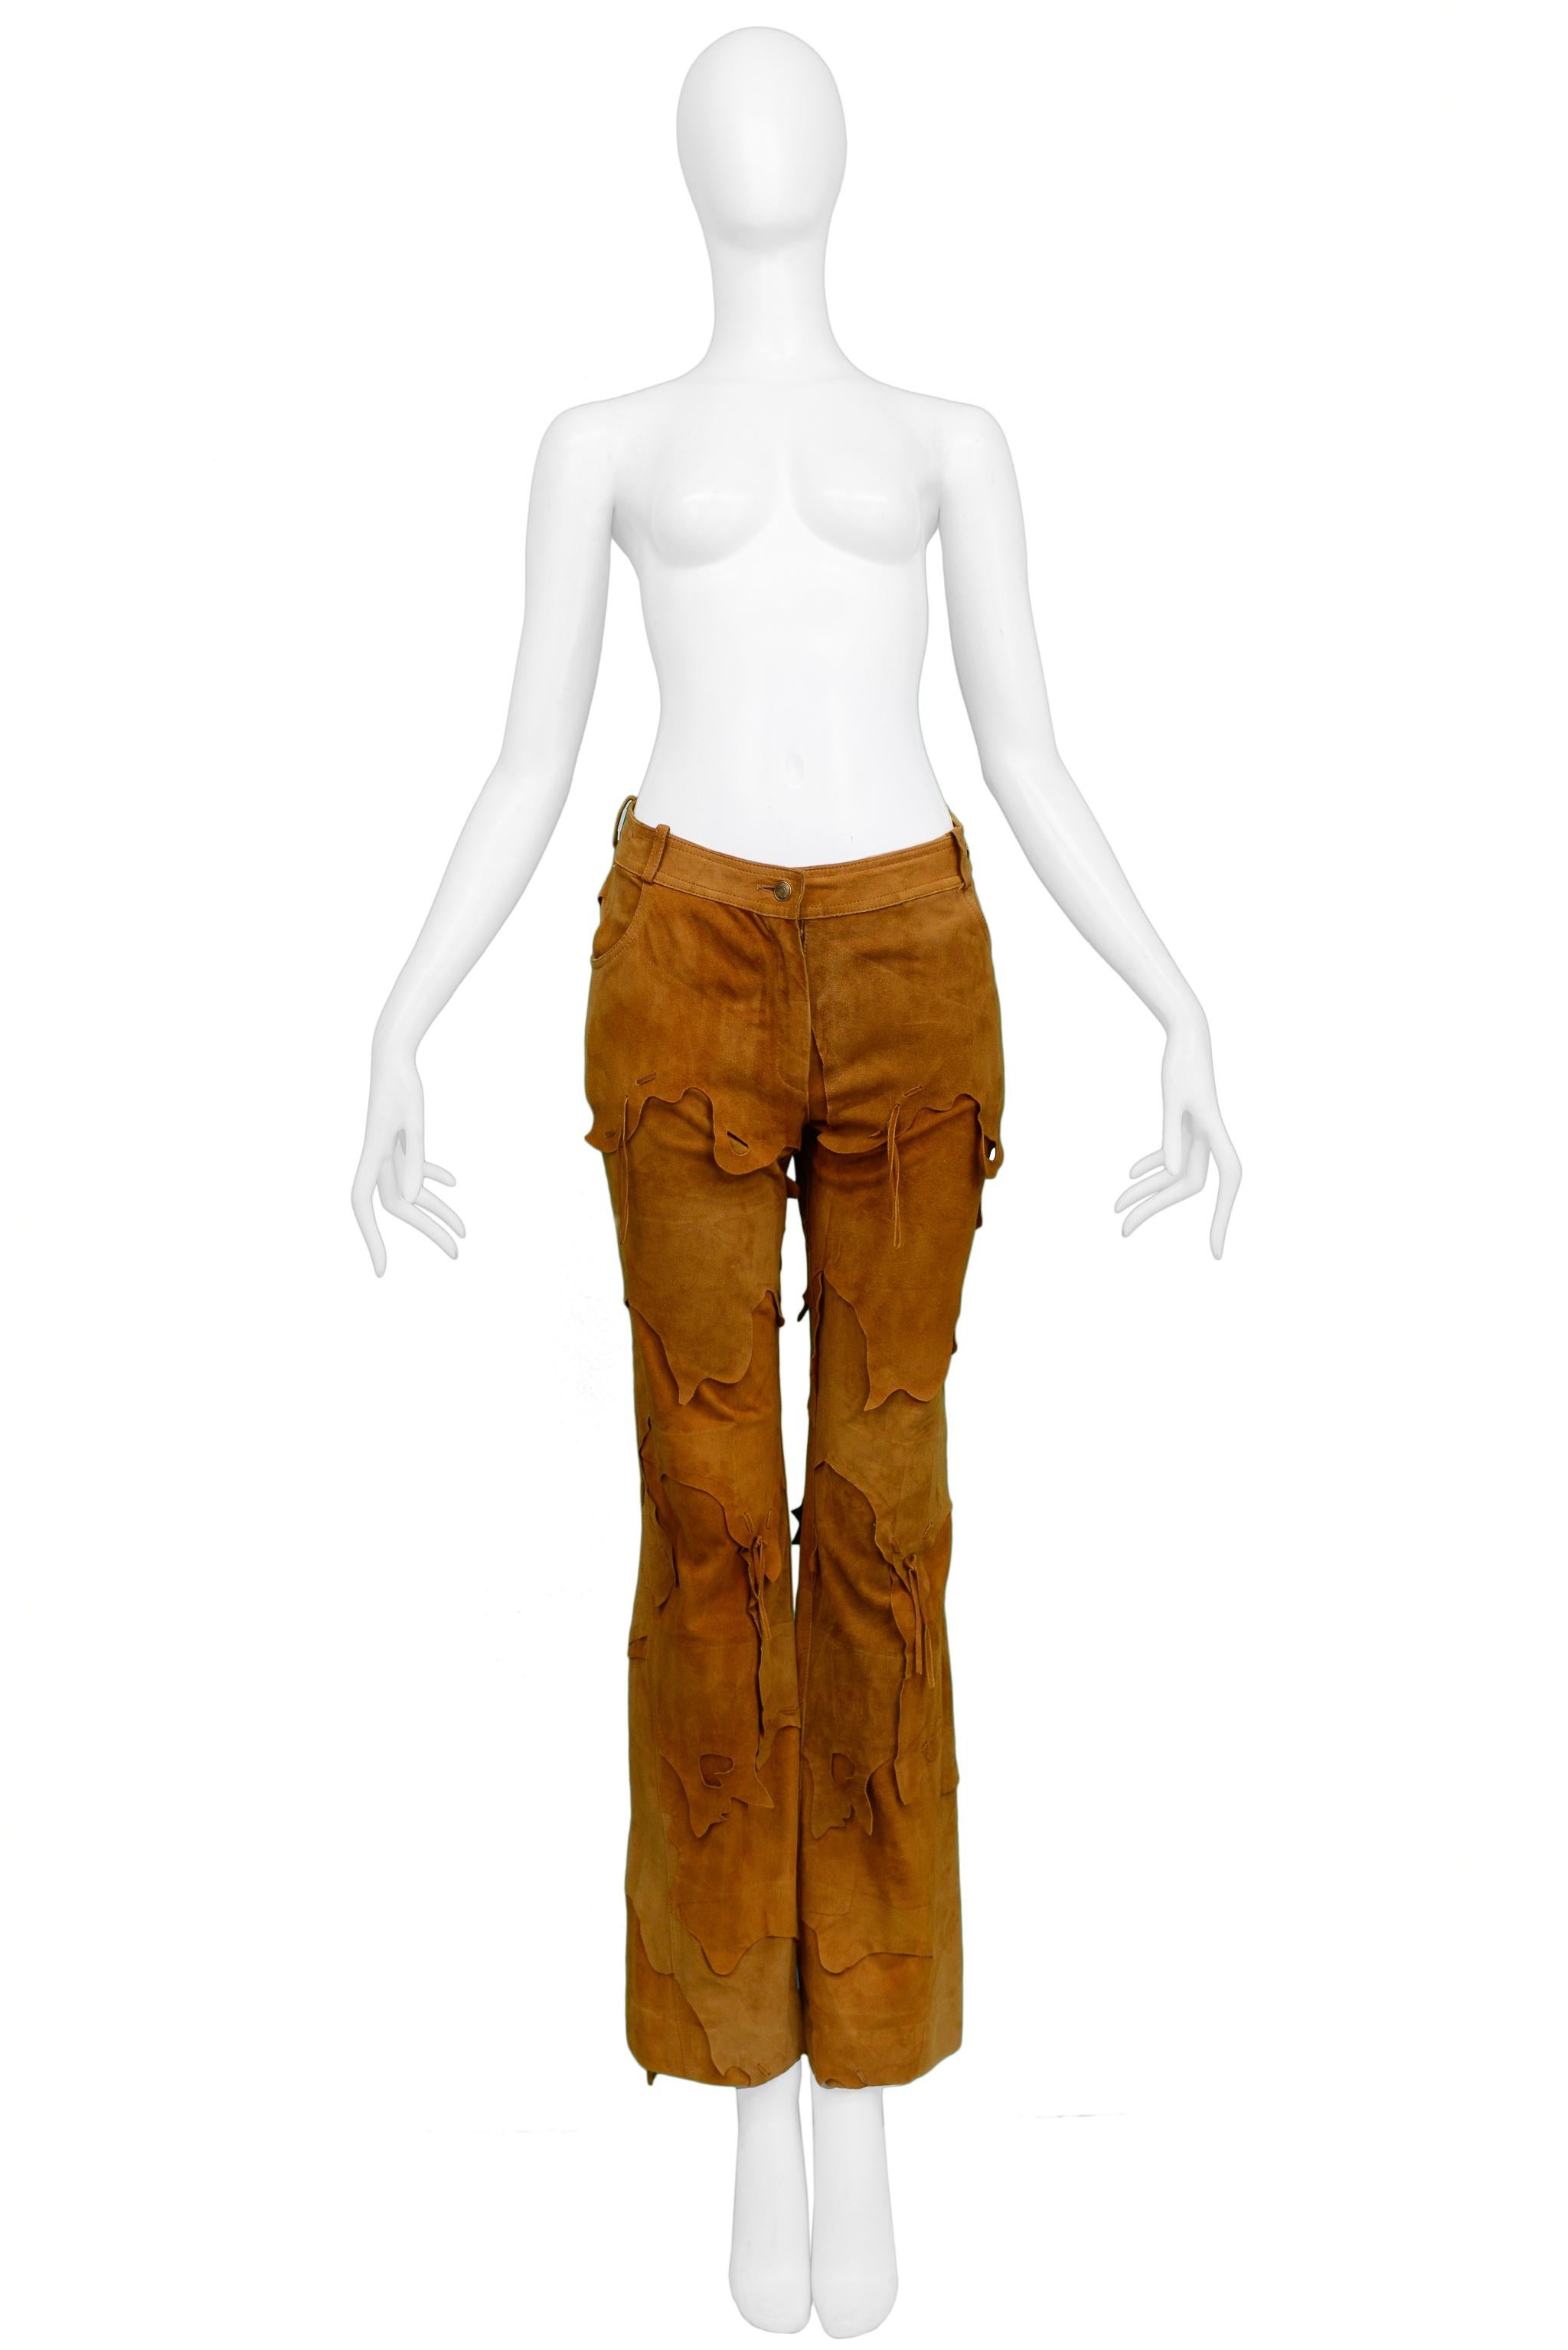 Resurrection Vintage is excited to offer a vintage Christian Dior by John Galliano brown goat suede leather pants featuring a metal snap waistband with belt loops, slightly boot cut silhouette, slit pockets, raw patchwork insets, and flat back with